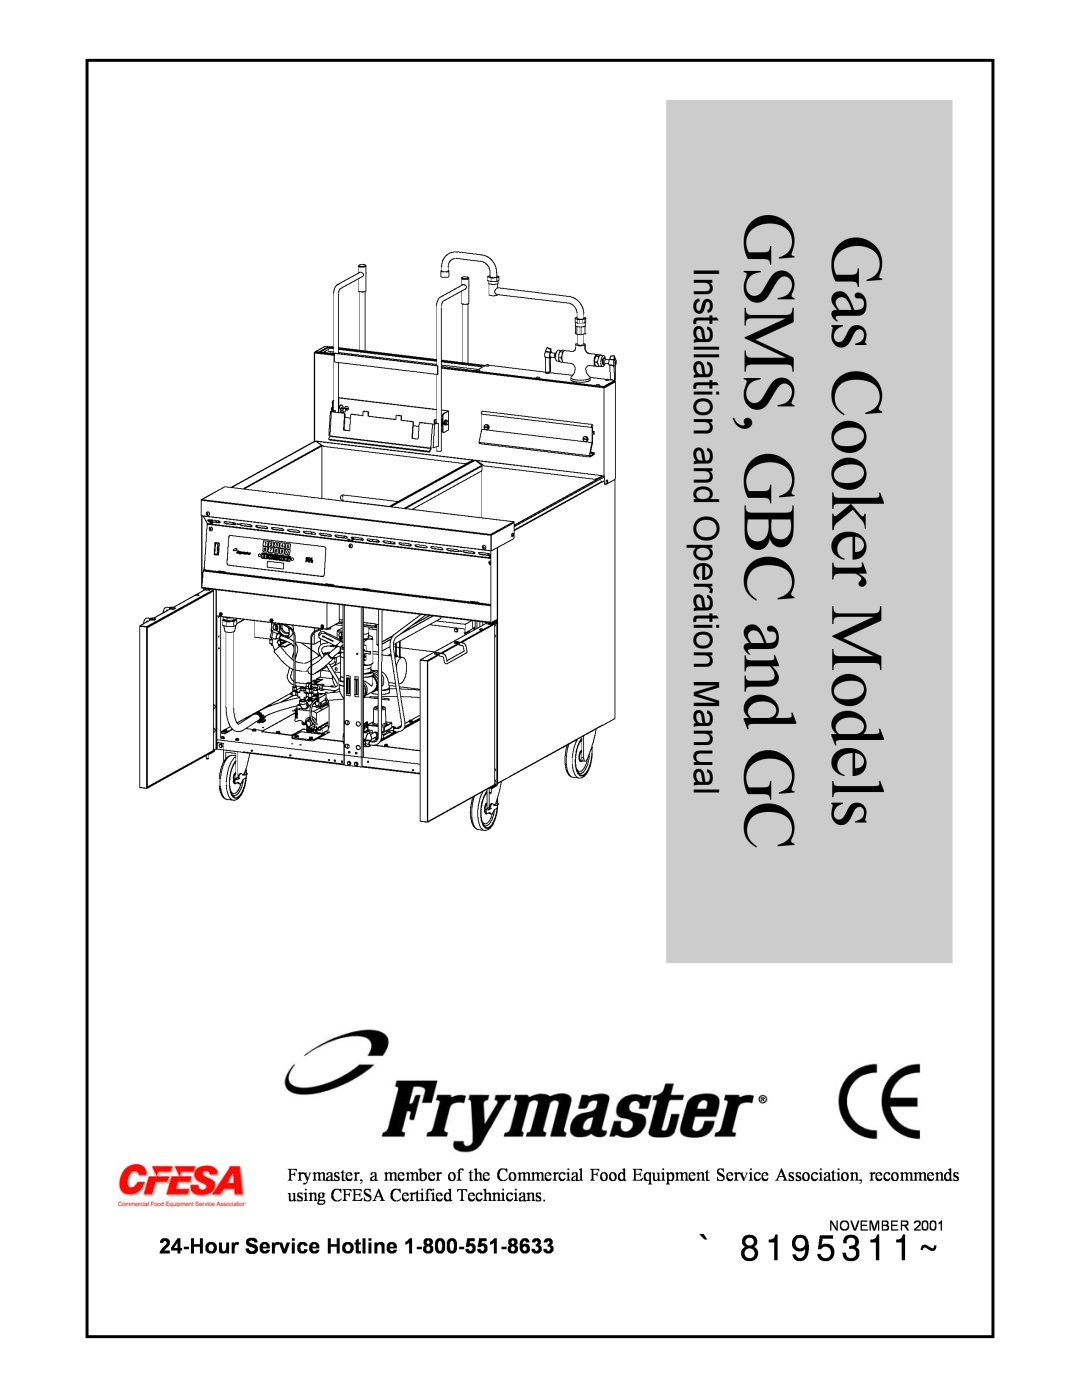 Frymaster operation manual HourService Hotline, `8195311~, Gas Cooker Models GSMS, GBC and GC 